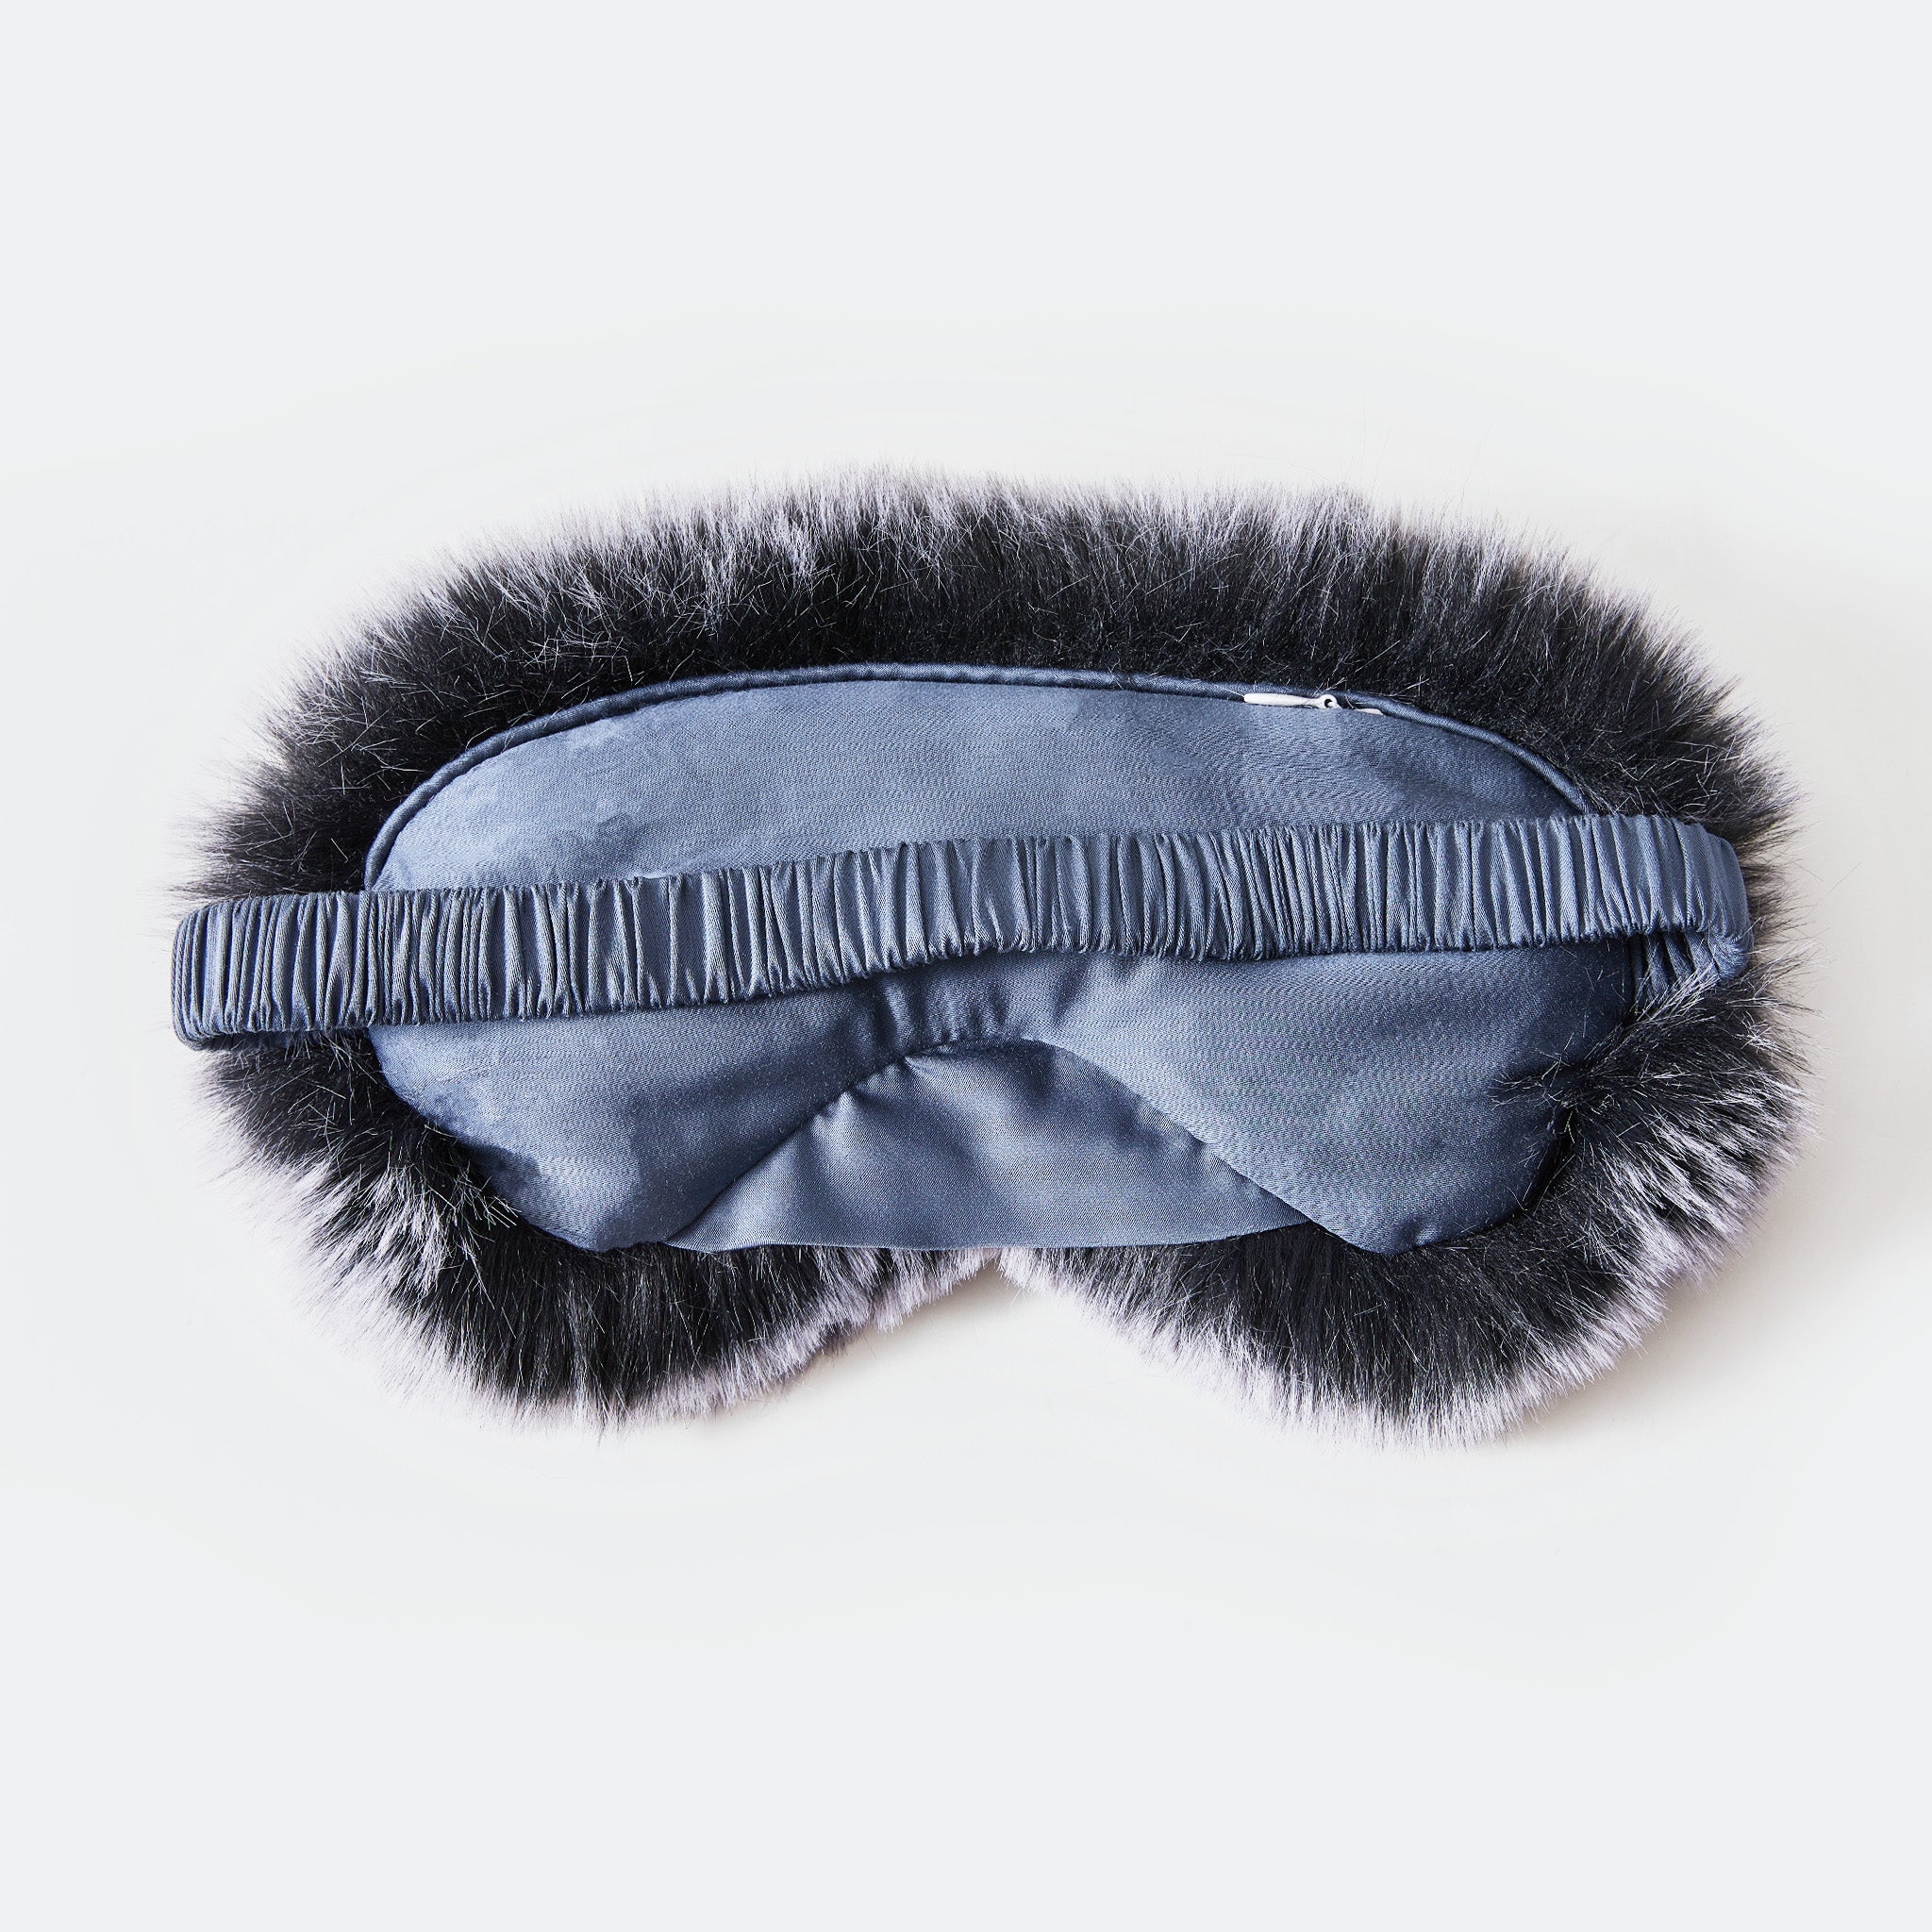 Weighted Eye Mask-silky fabric